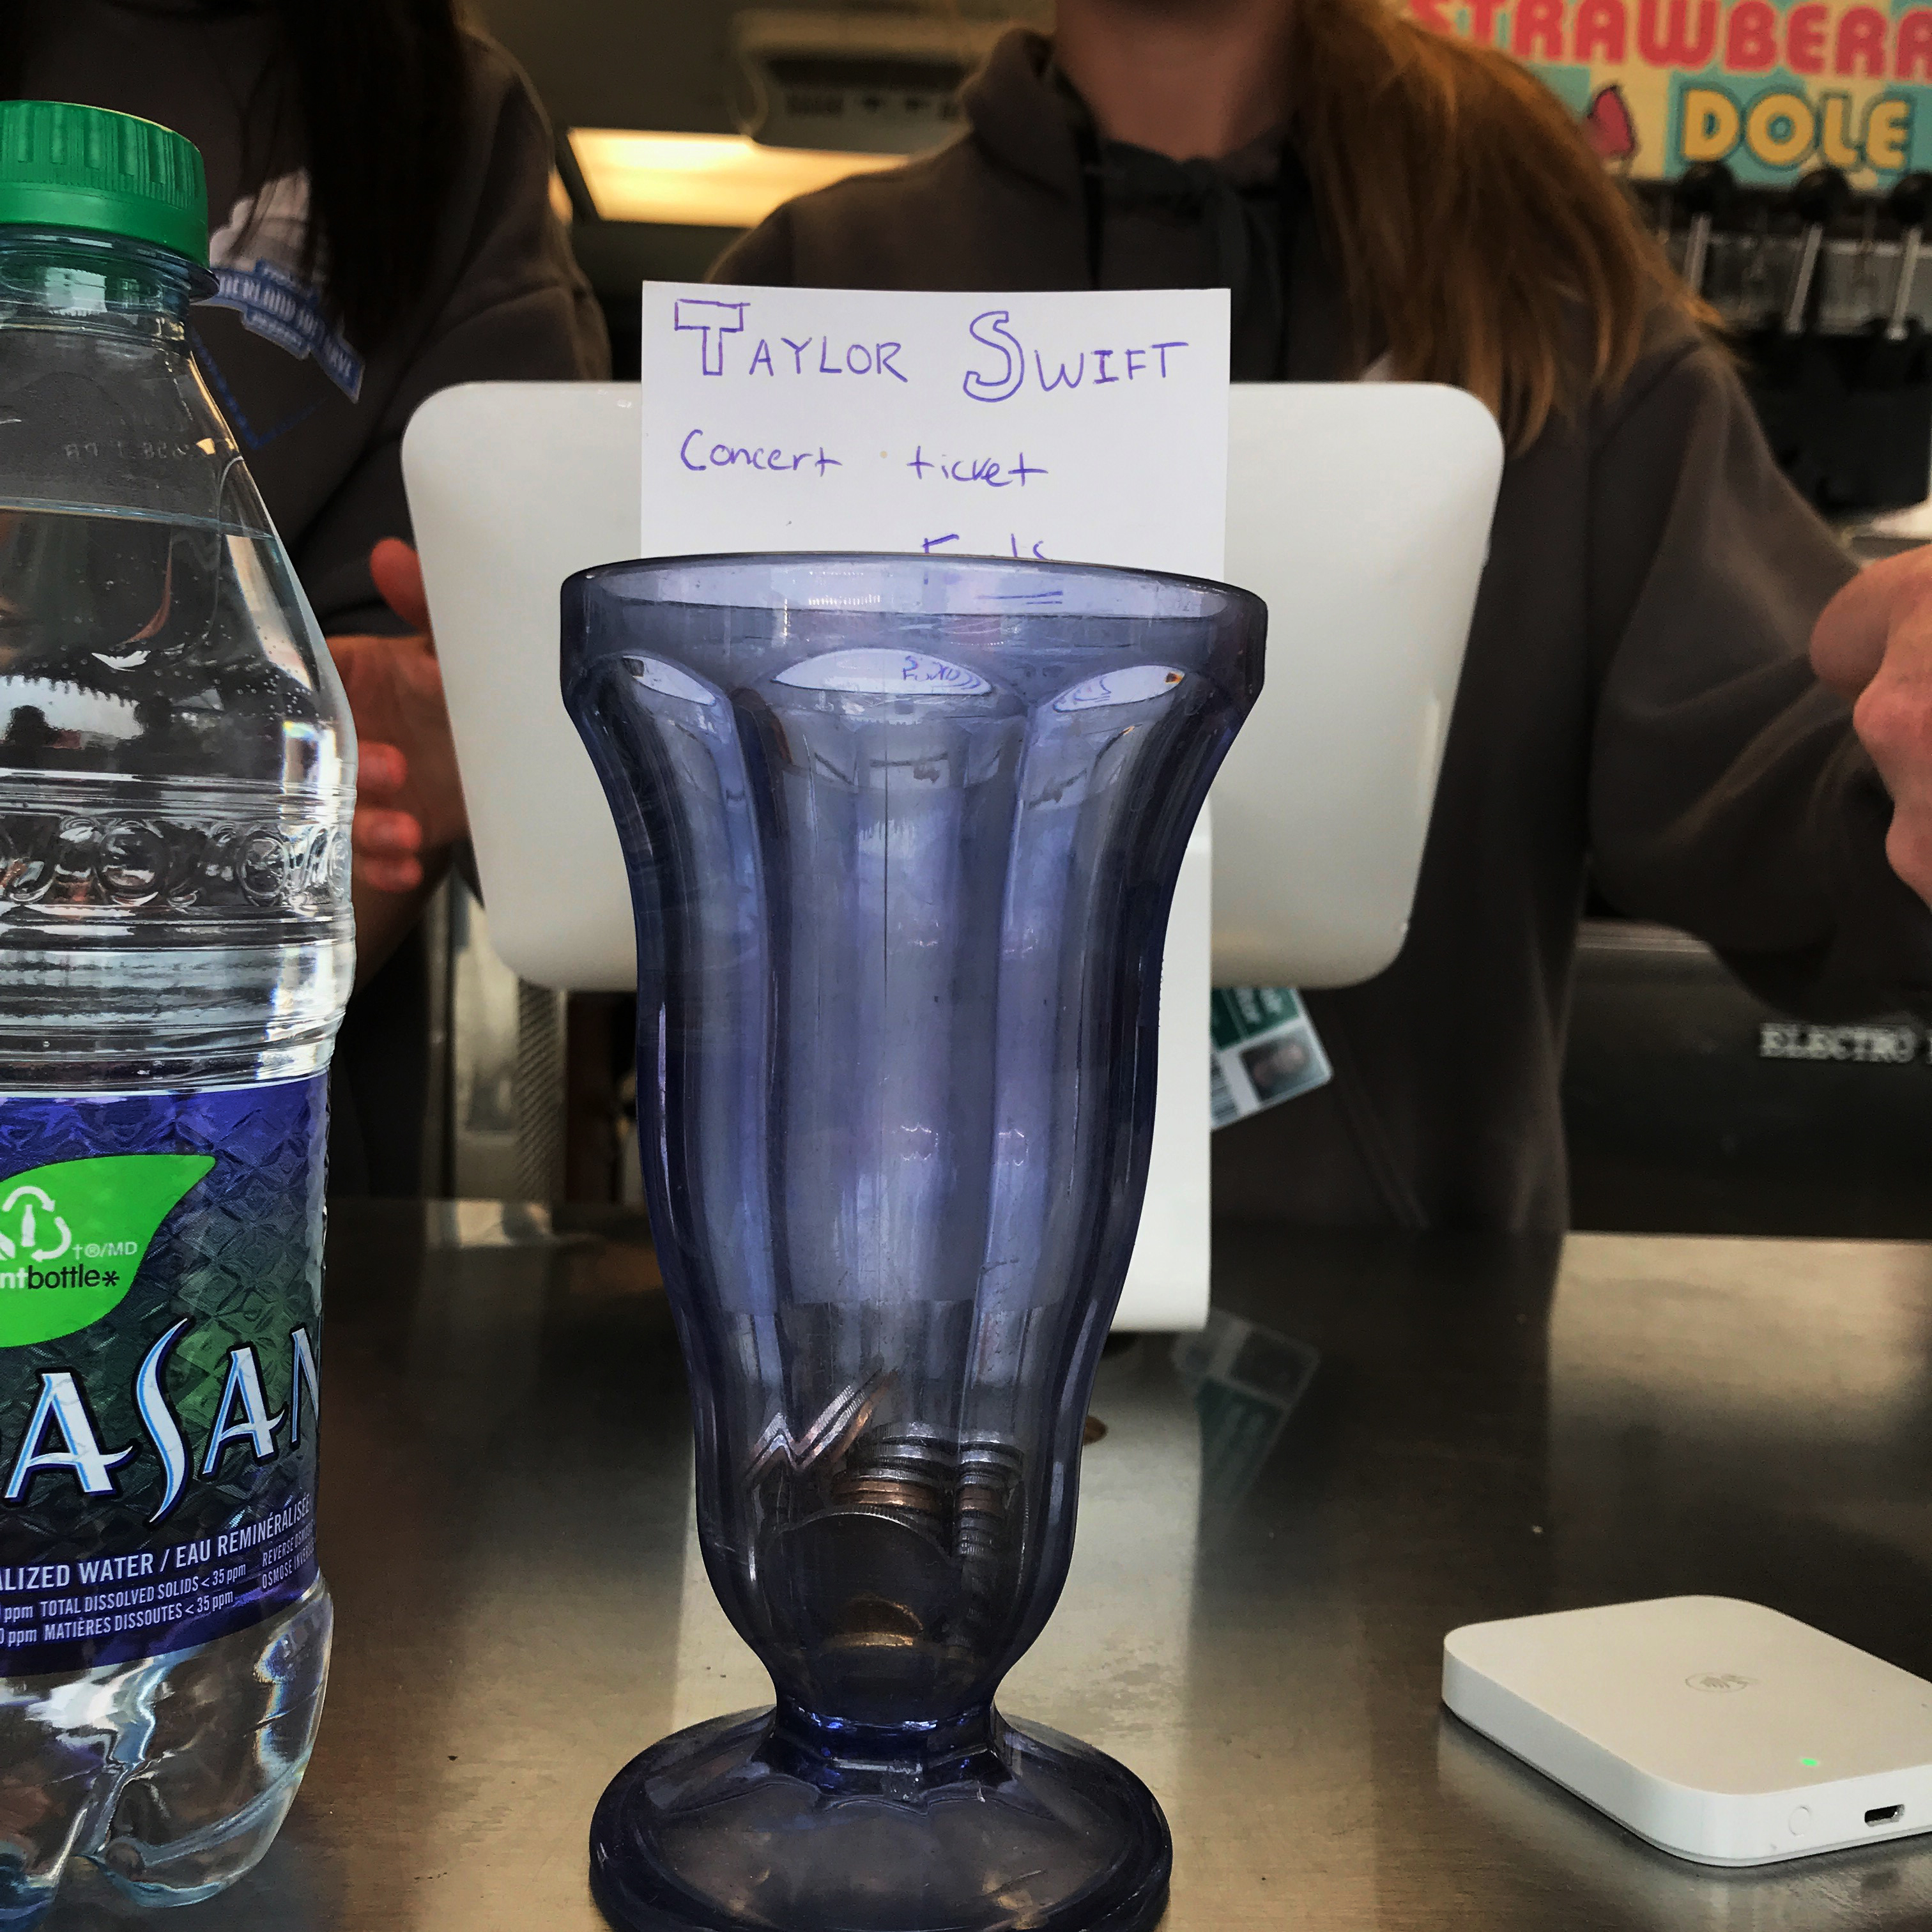 A tip jar at a concession stand for Taylor Swift tickets.